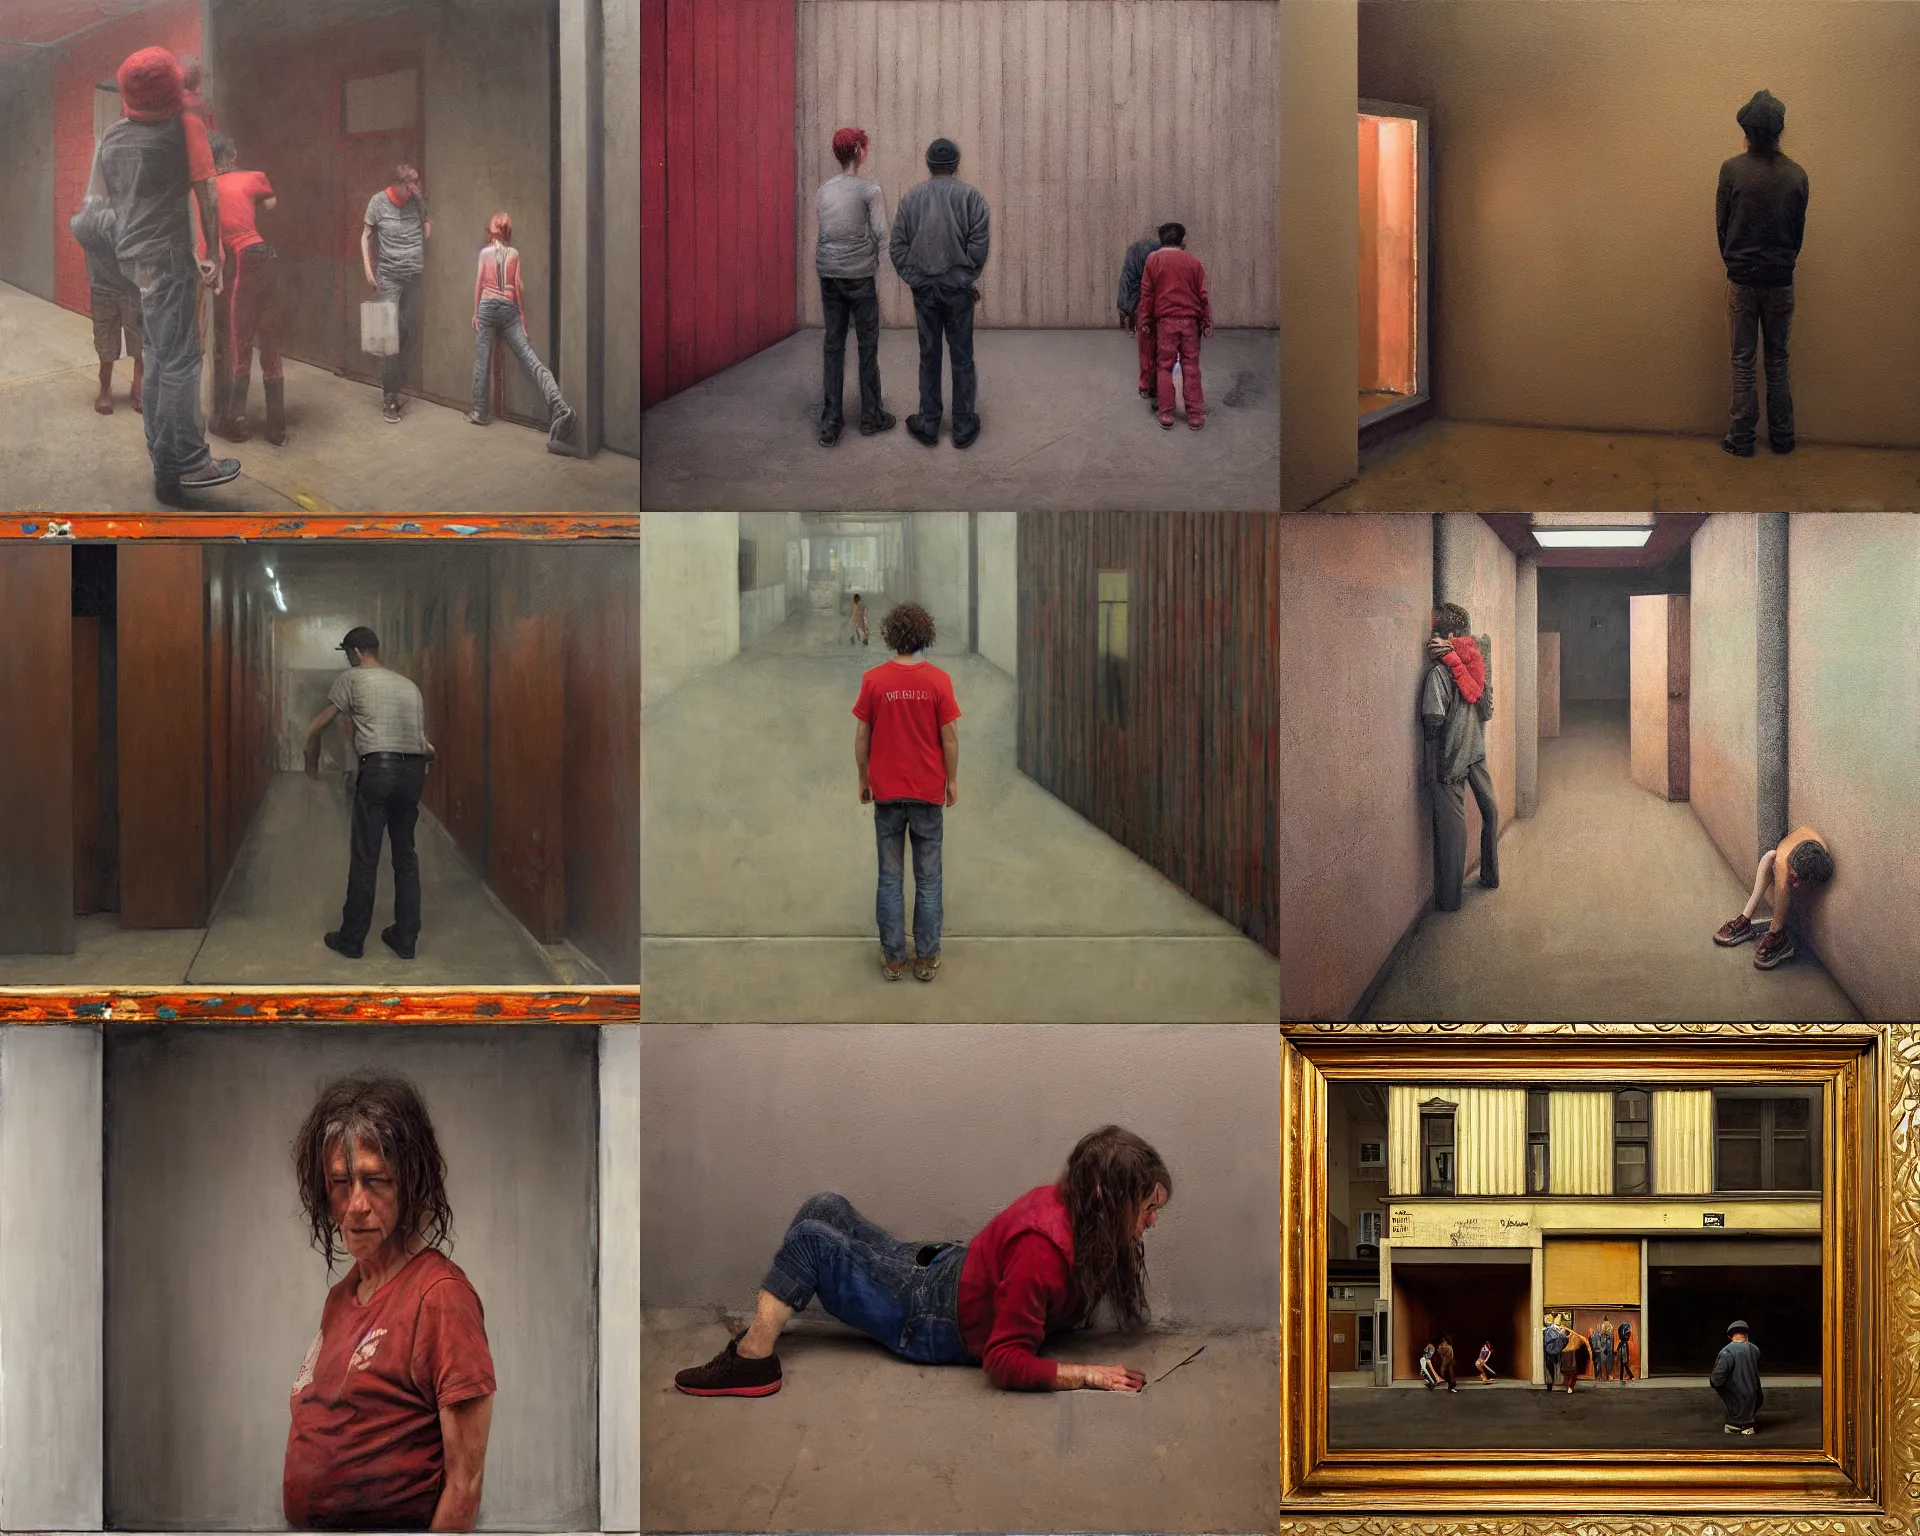 Prompt: A painting by Dan Witz